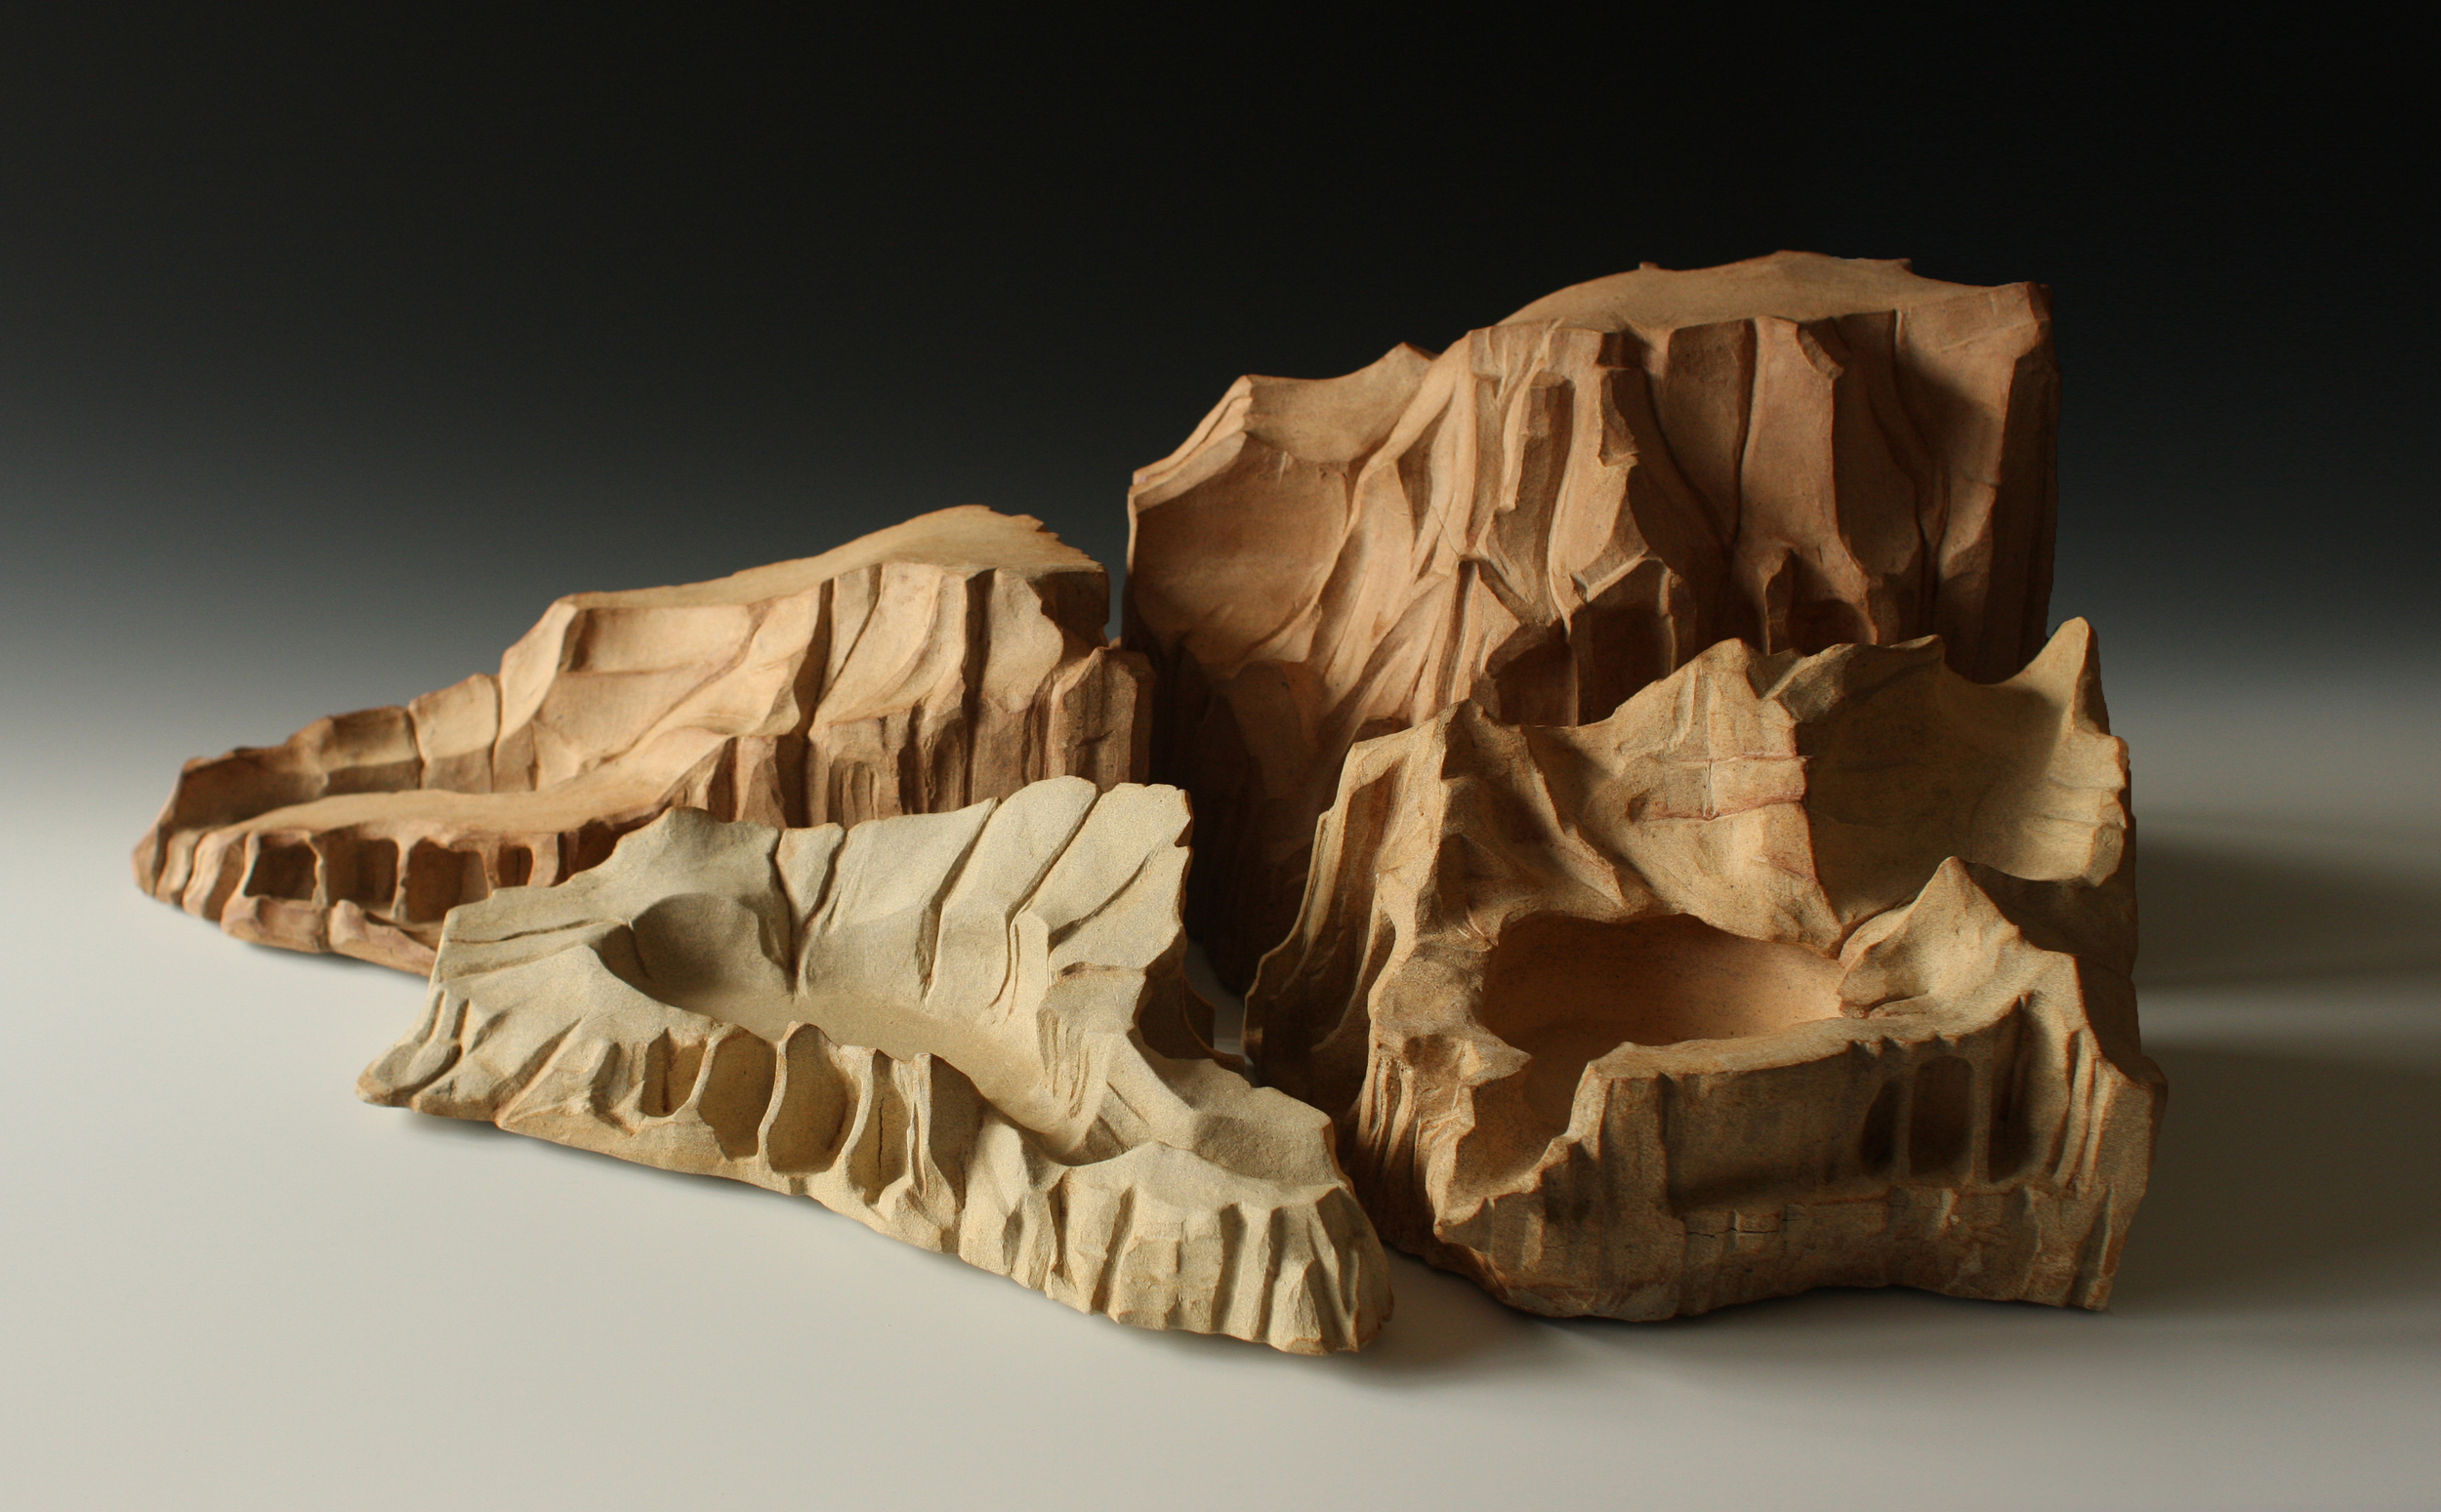   Landscape in Four Parts  stoneware clay 12" x 32" x 23"  2014 